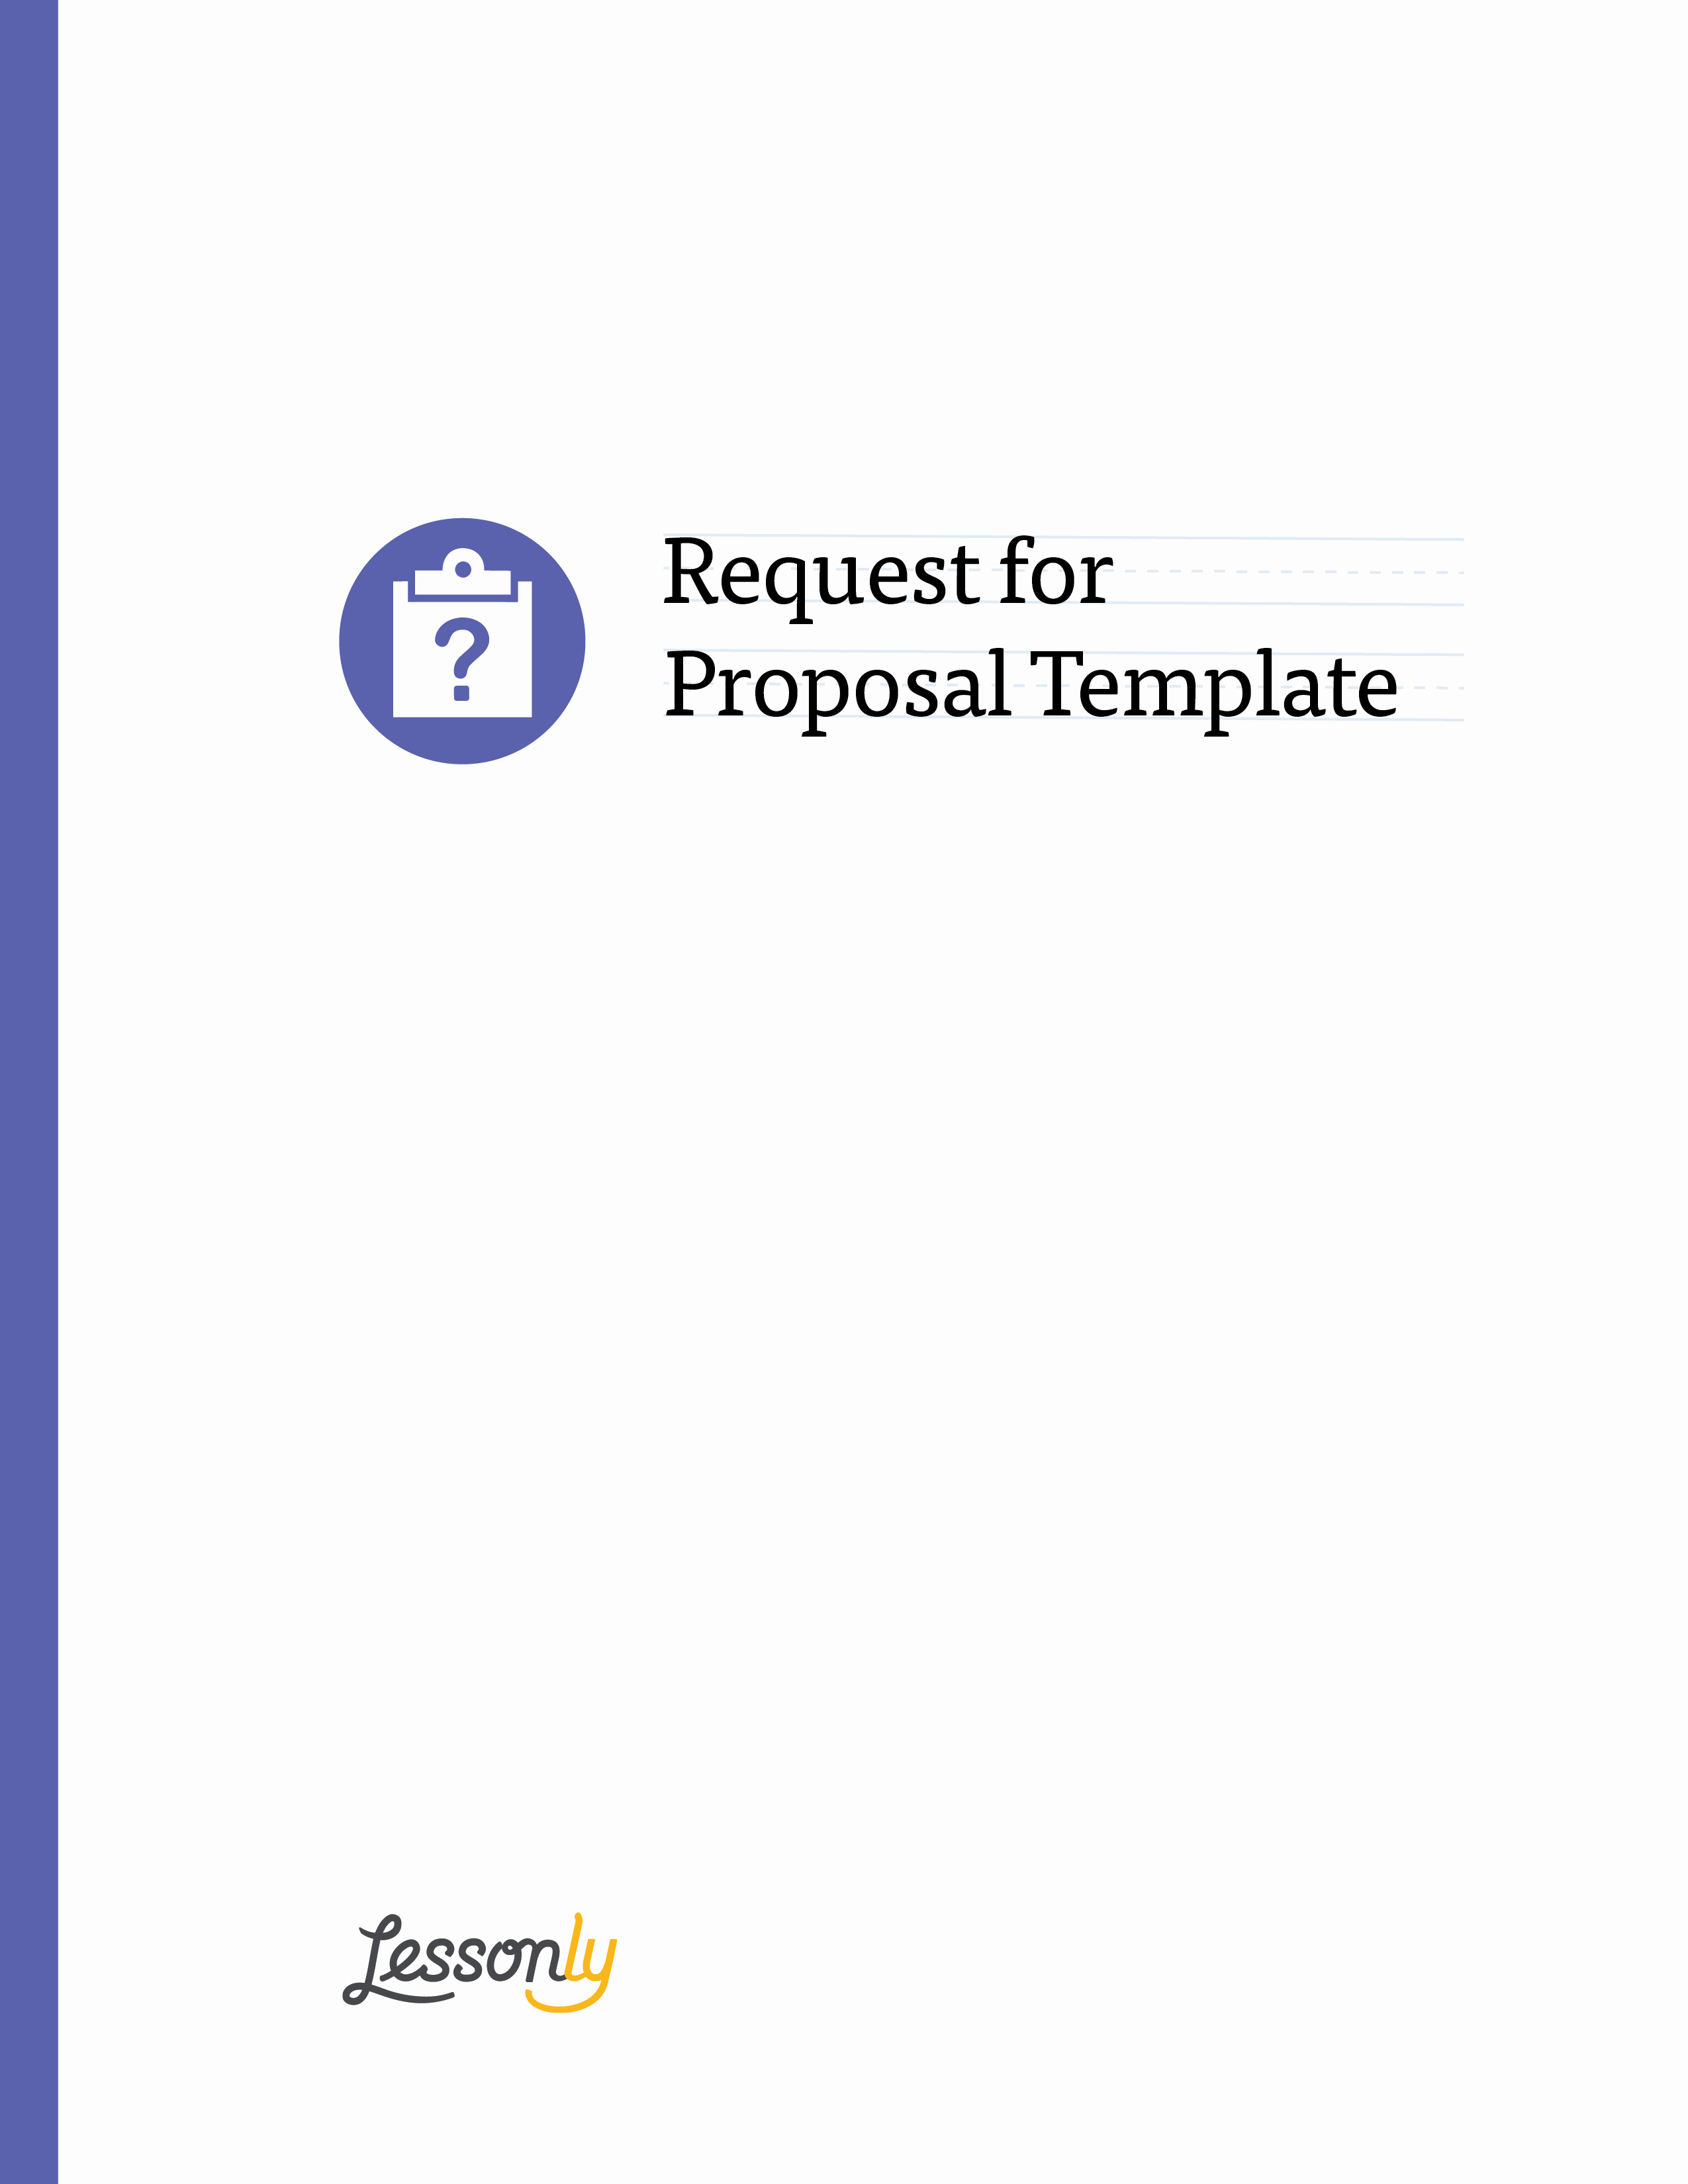 Request for Bid Template Best Of Free Lms Request for Proposal Template Lessonly